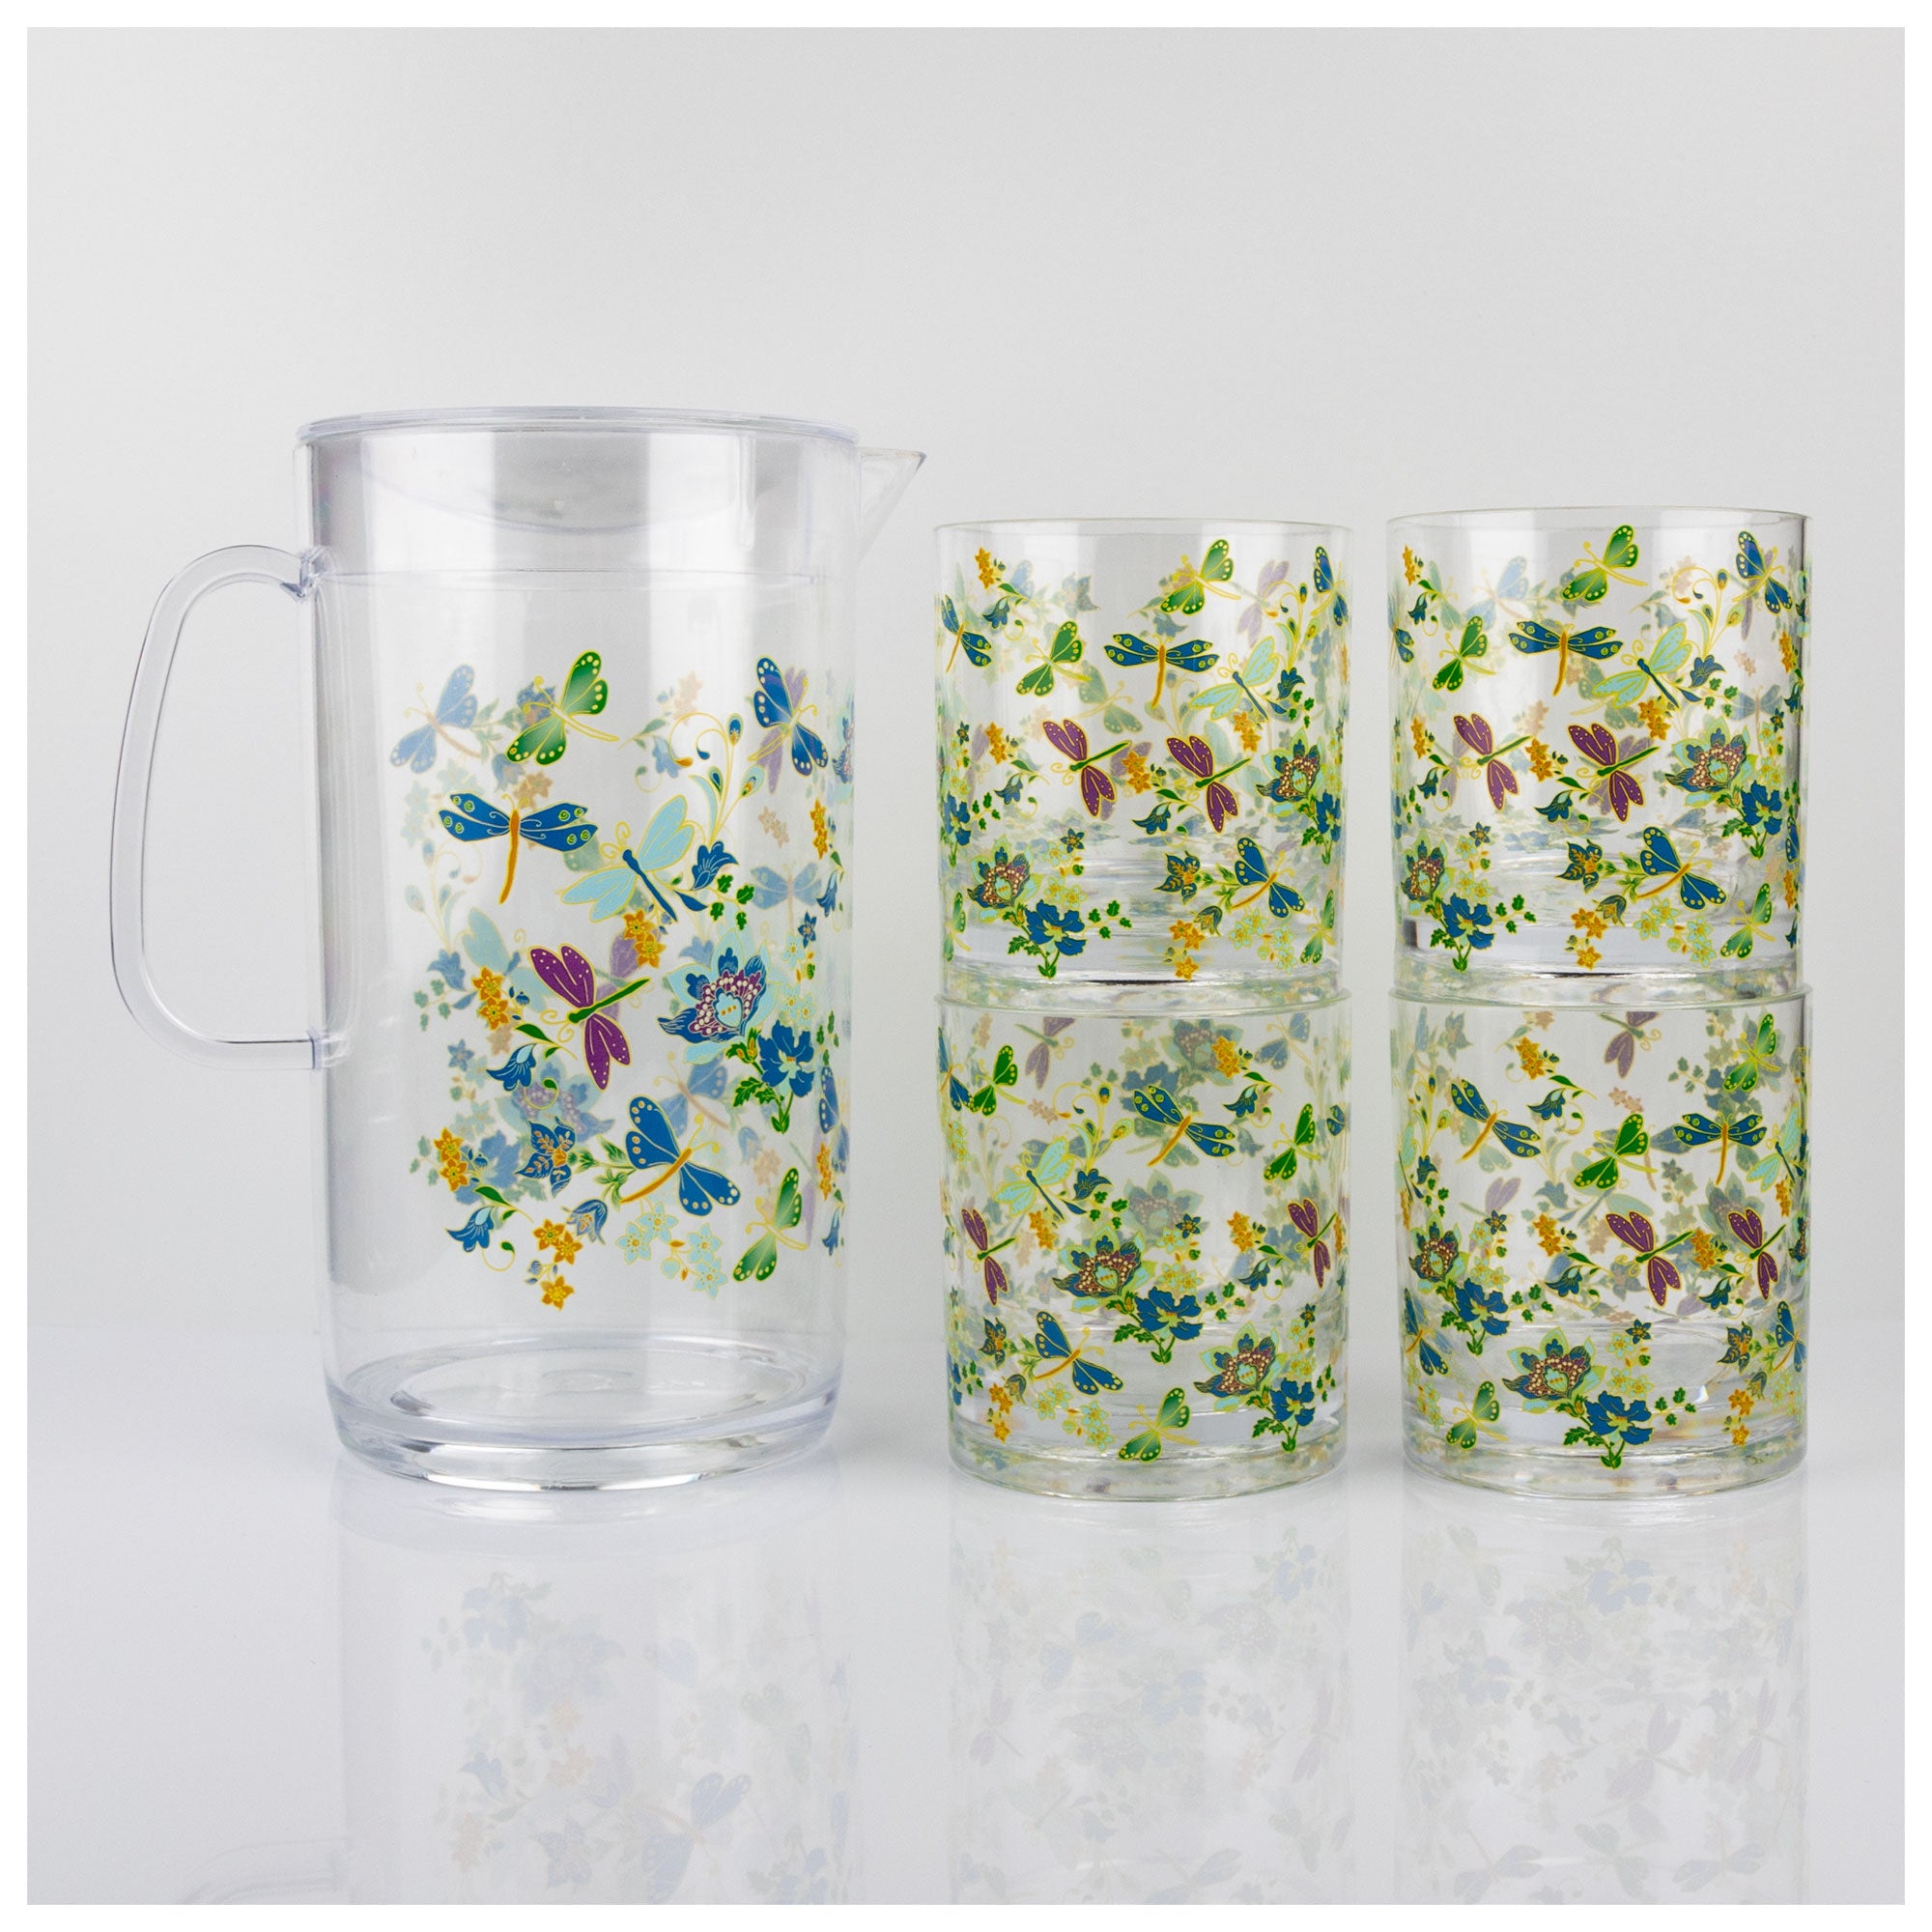 Dragonfly Meadow 64 Oz Pitcher & Drinkware Set - Pitcher & Cups